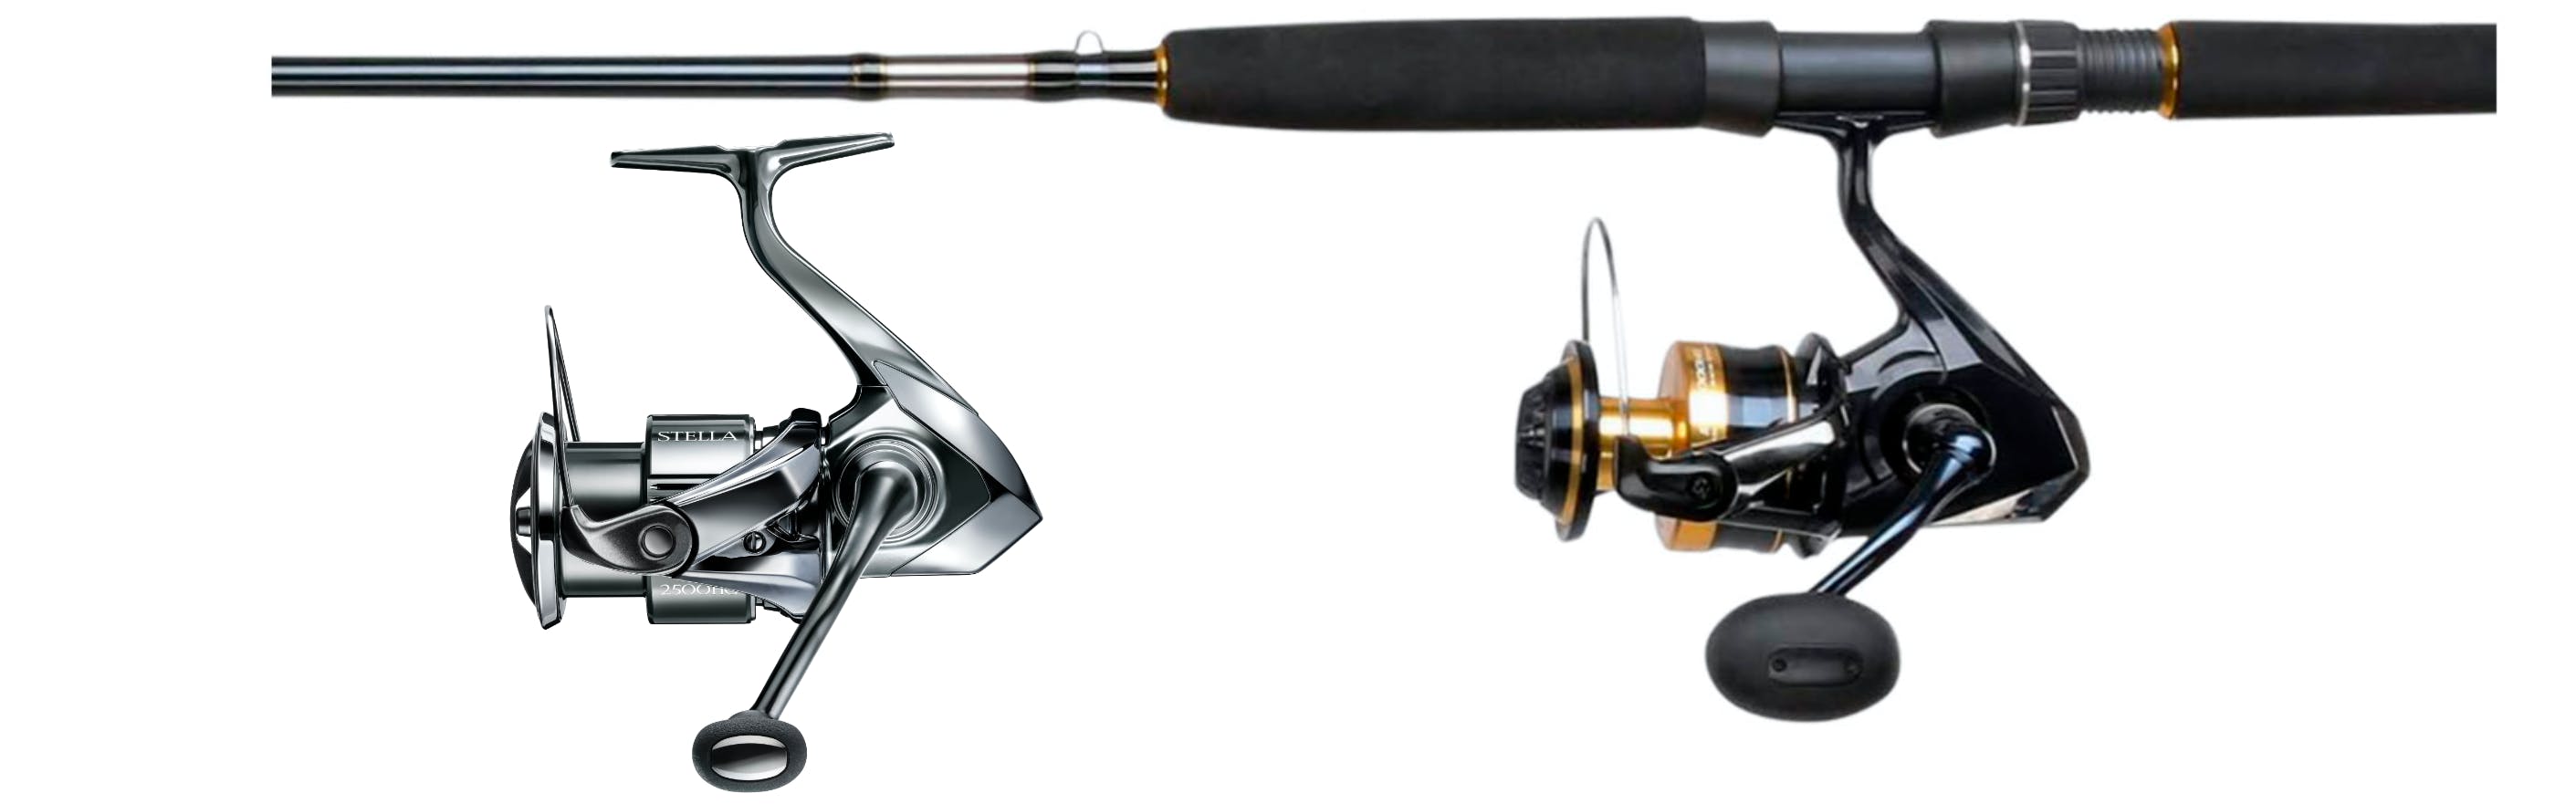 How to Choose the Right Spinning Reel